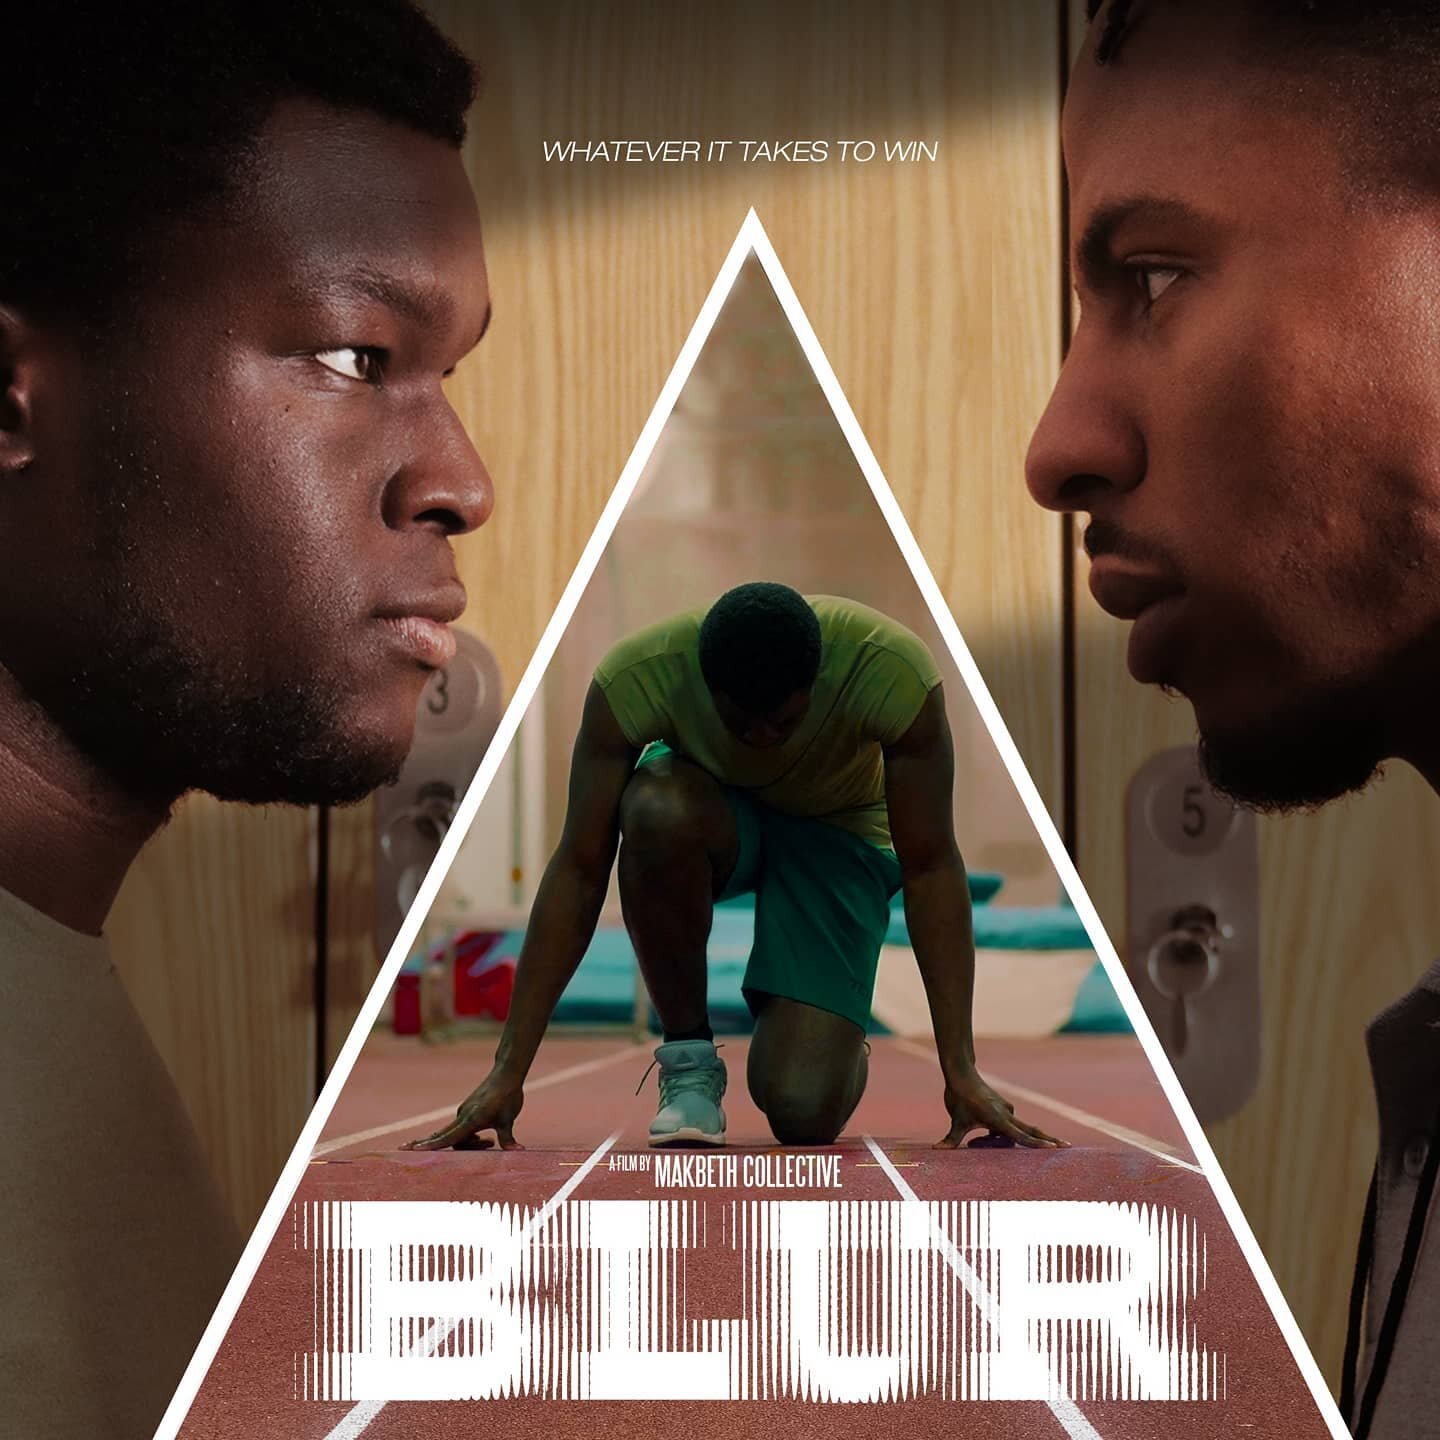 Blur &quot;coming soon&quot; 
How is started vs how its going

#10filmcommandments #aspirefilms  #gaffer #lighting #light #cinematographer #cinematography #directorofphotography #director #bestboy #filllight #keylight #exposure #composition #theoryan